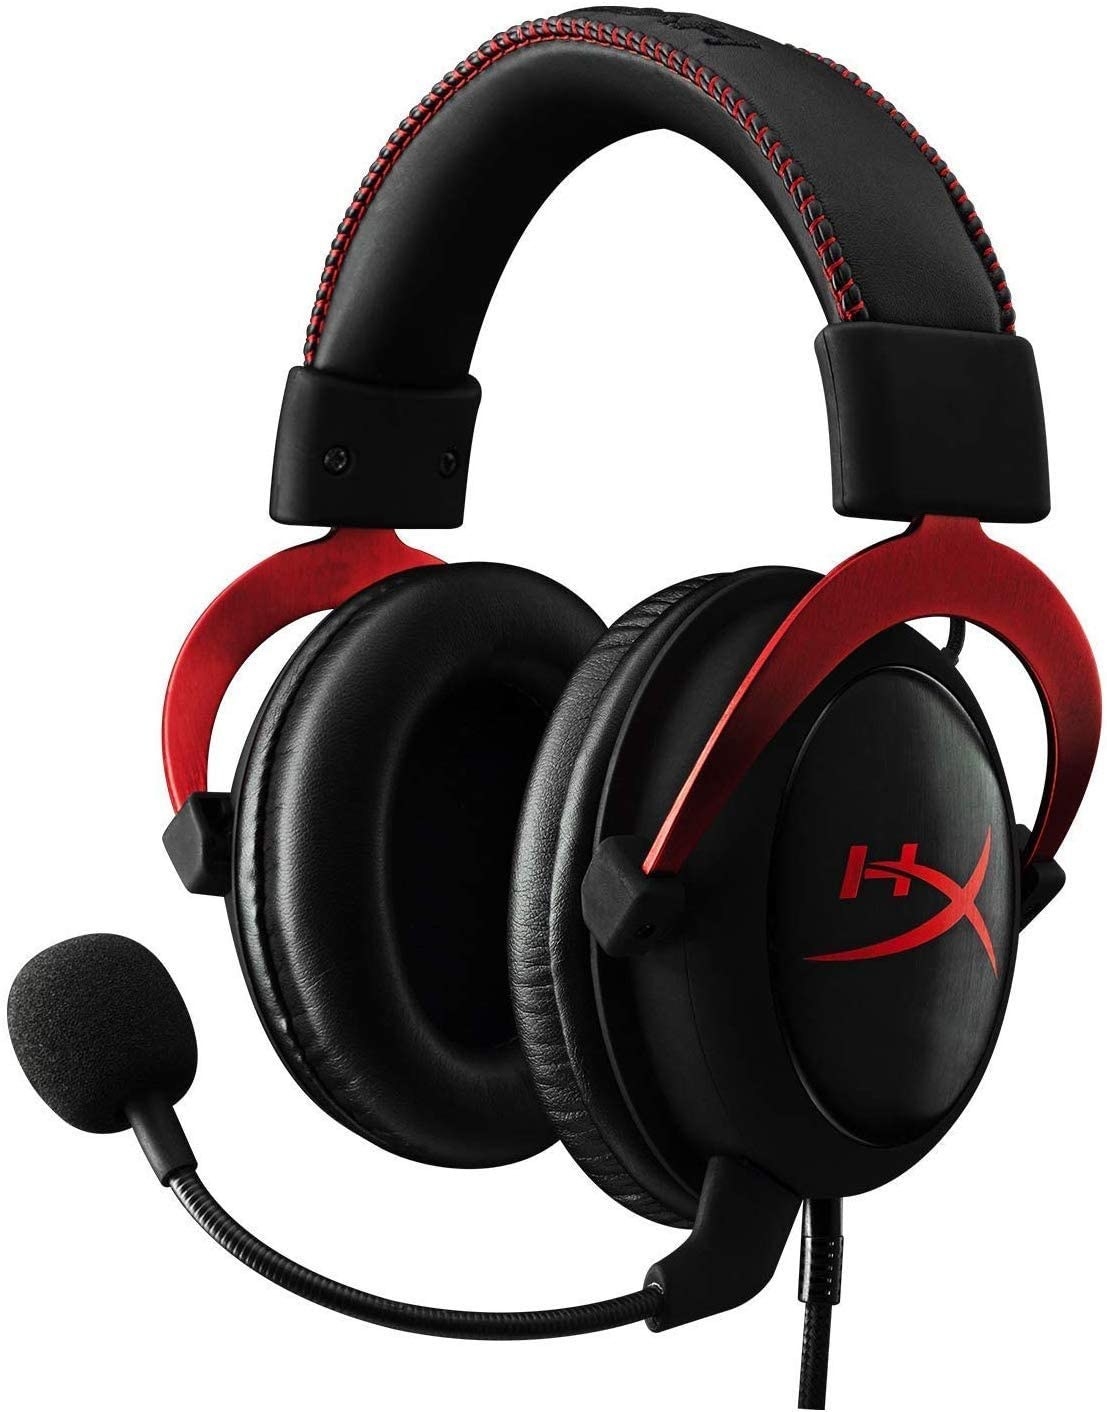 a black headset with red accents